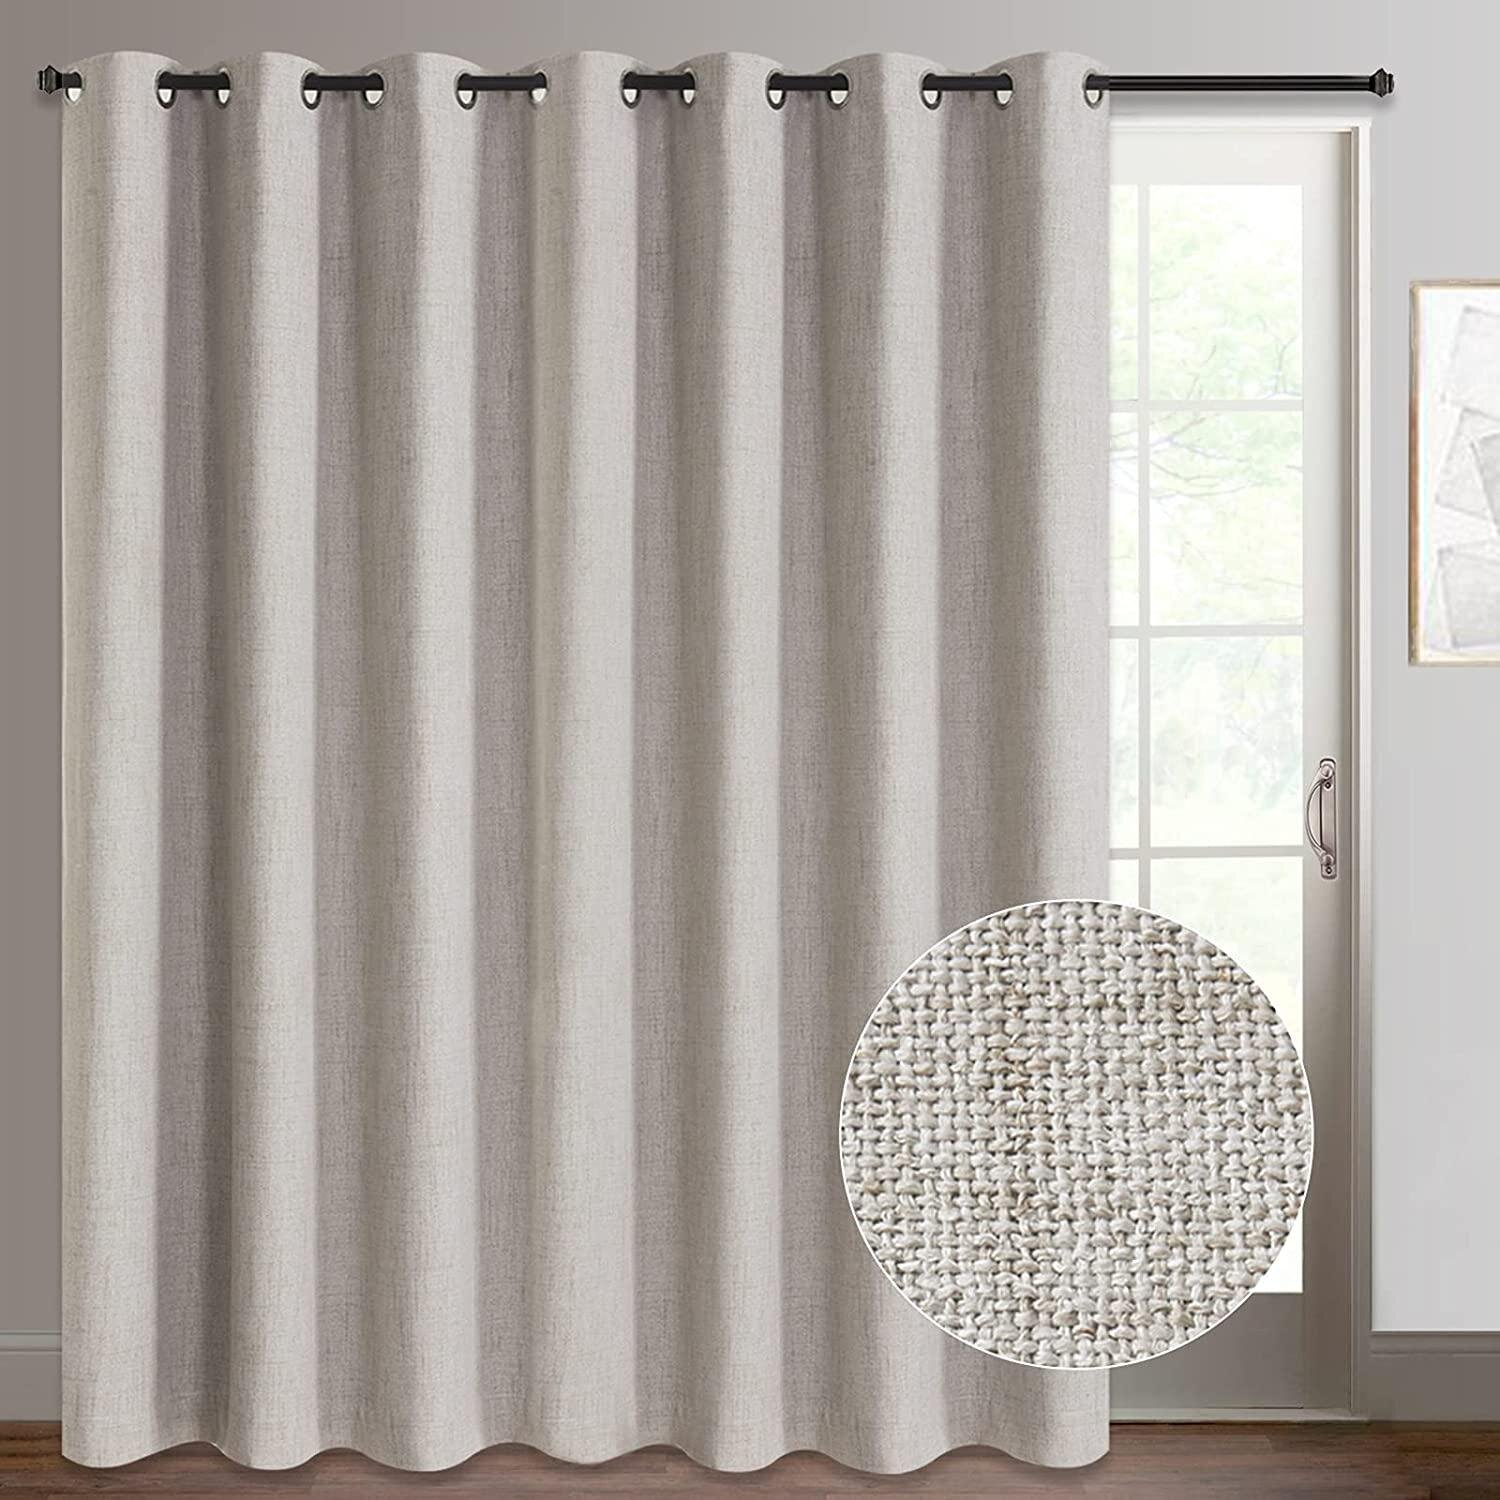 Primitive Textured Linen 100% Blackout Curtains for Bedroom/Living Room Energy Saving Window Treatment Curtain Drapes 2 Panels, 52 x 84 in, Natural Burlap Fabric with White Thermal Insulated Liner